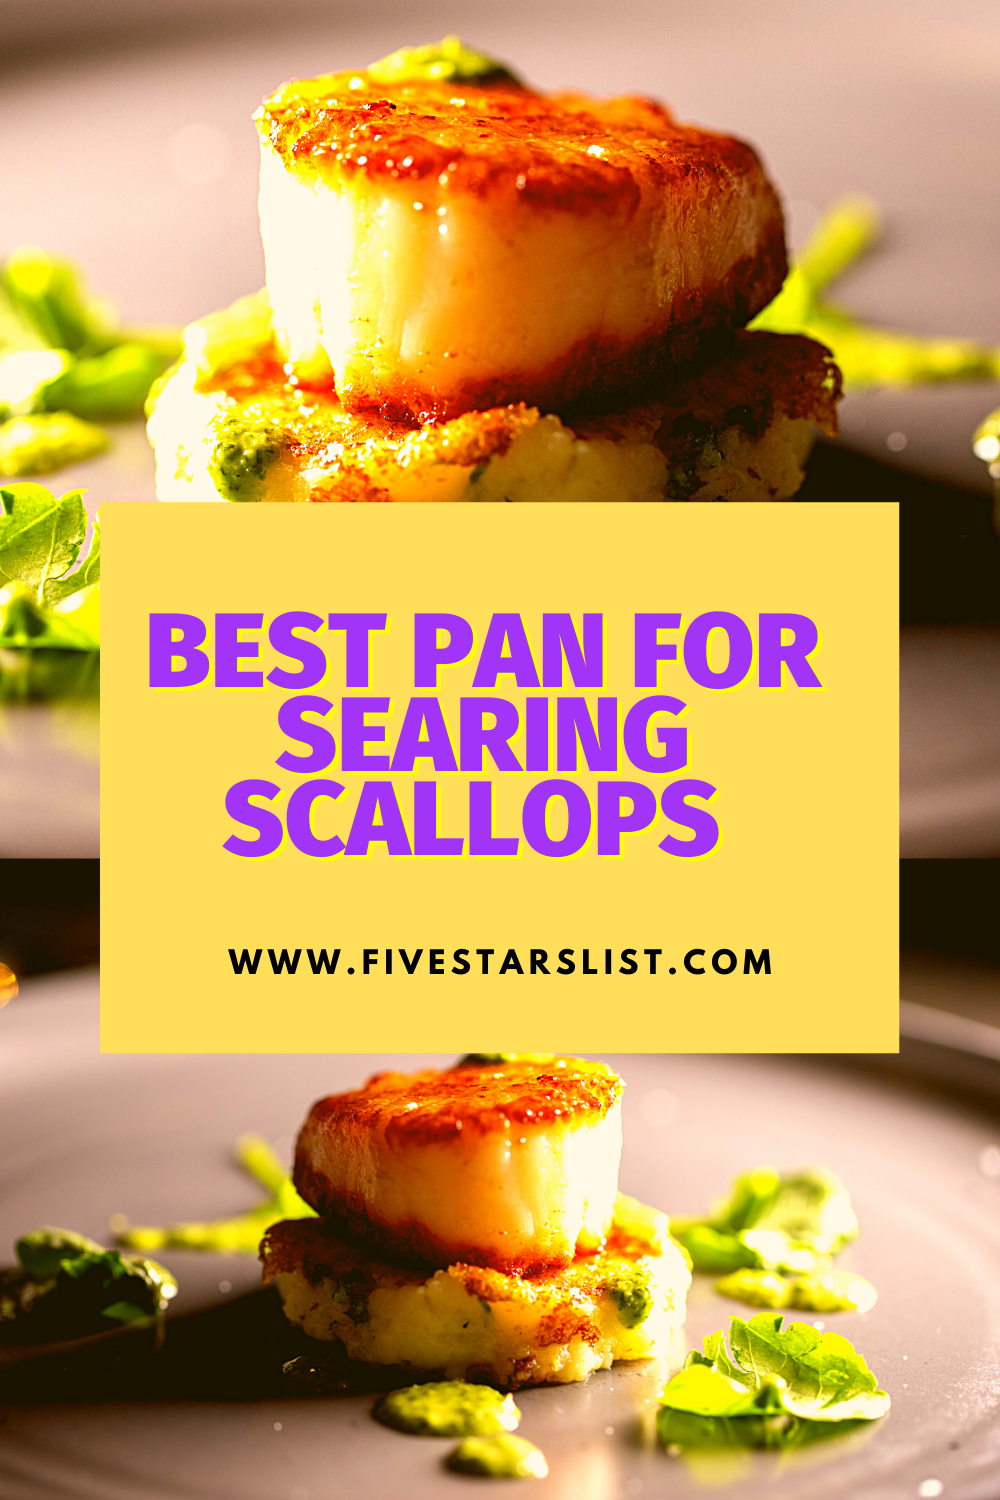 Best Pan for Searing Scallops - Searing Scallops in Cast Iron Pan